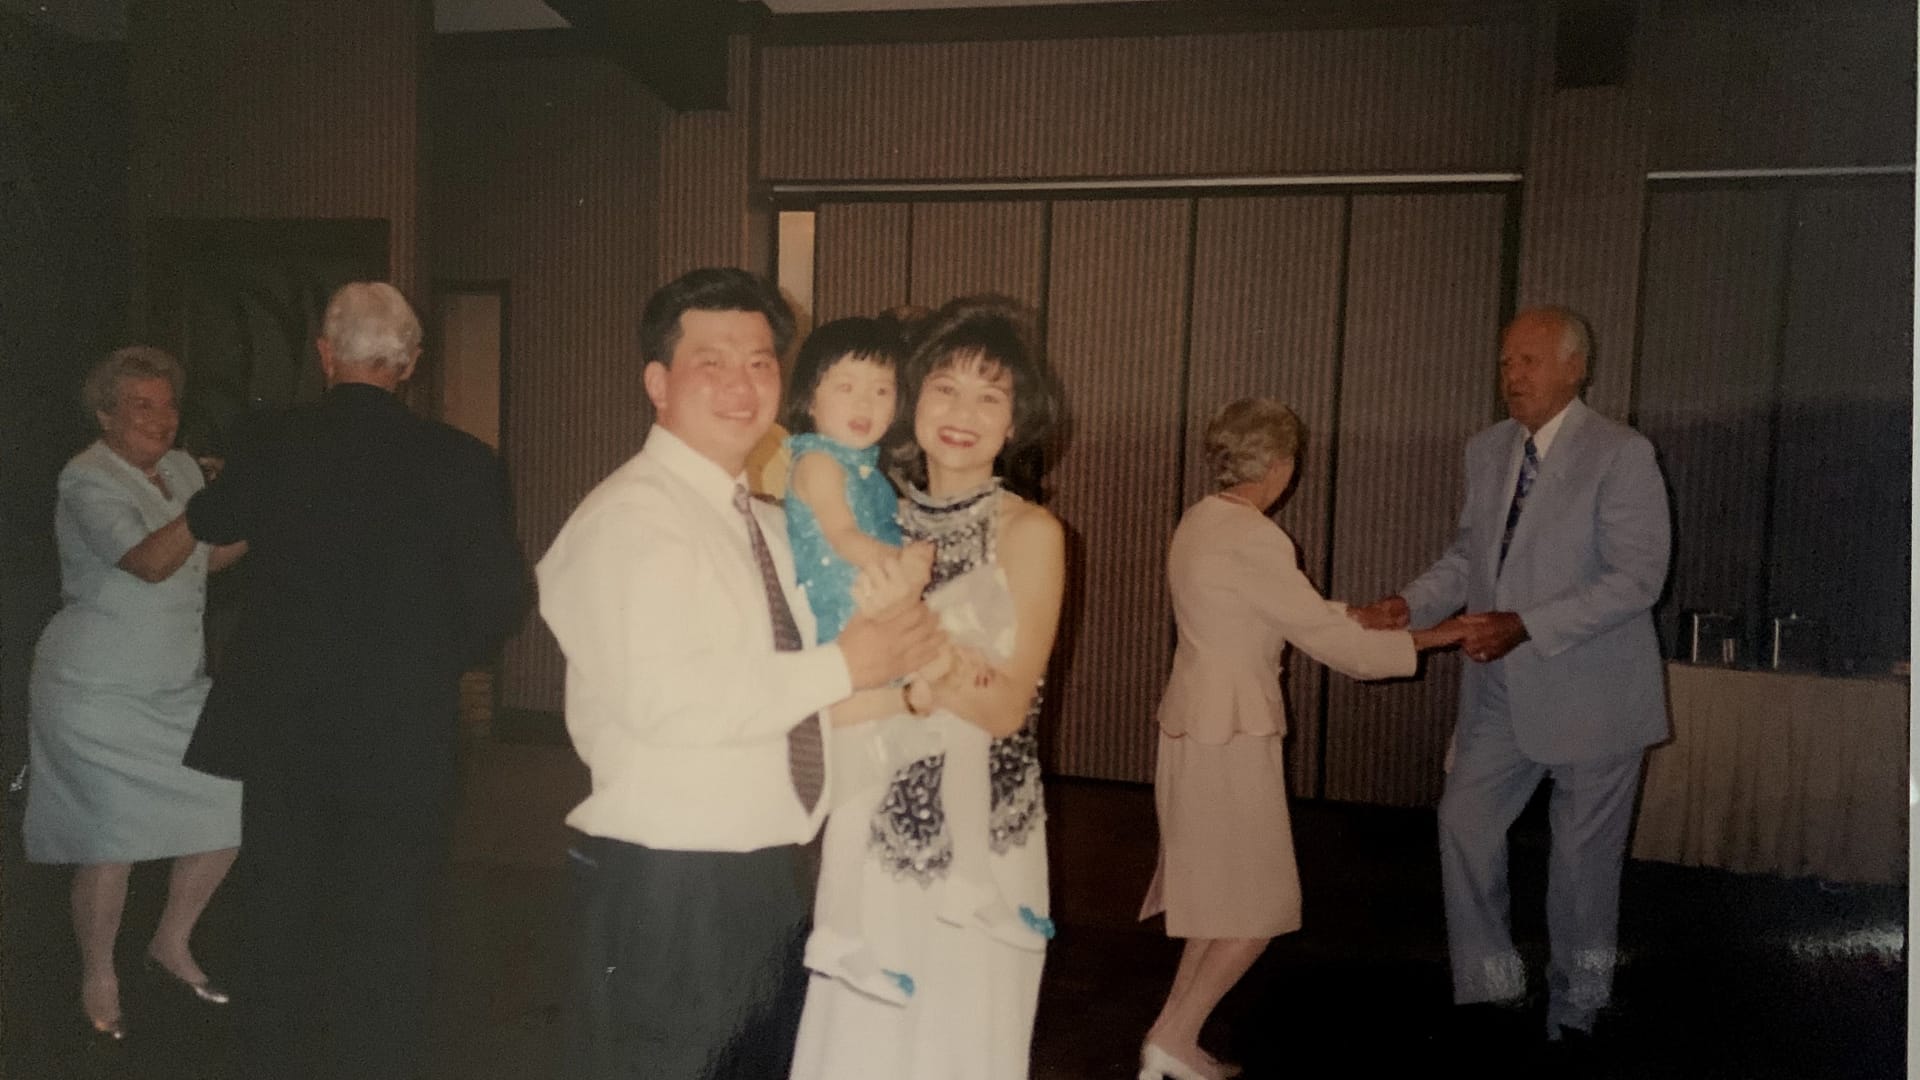 Kristina Truong and her parents, Christine Cao and Luat Truong.